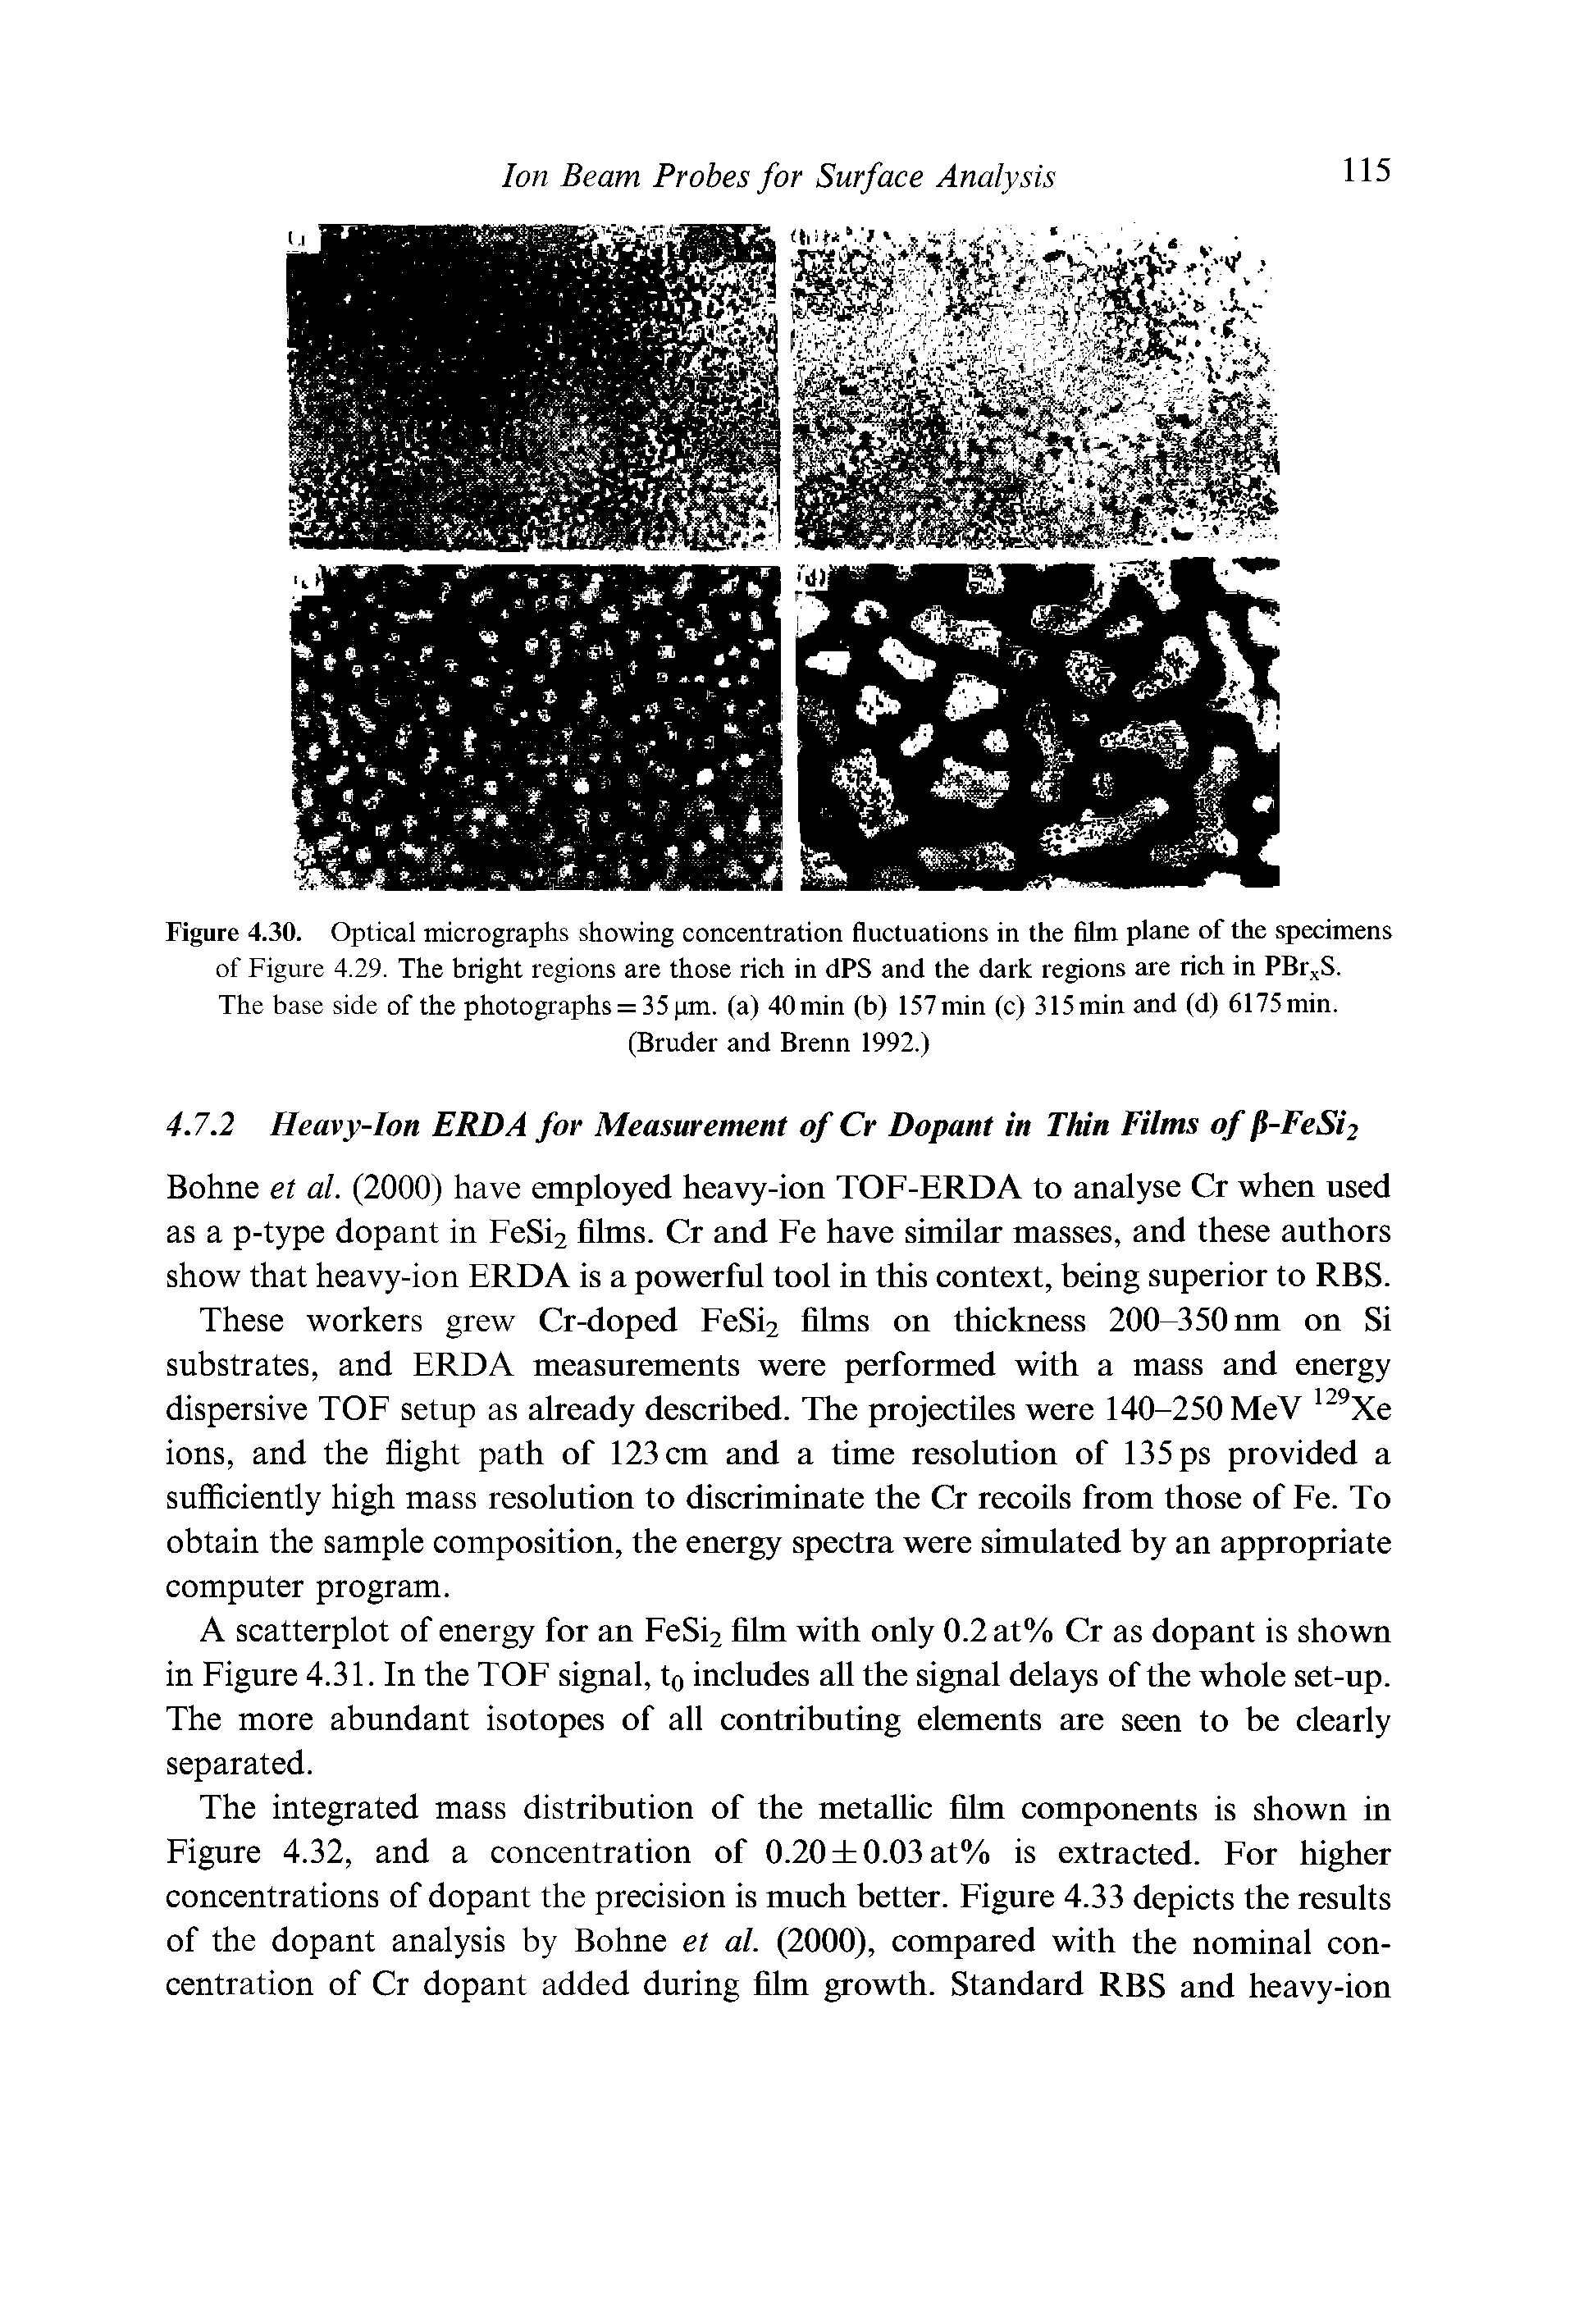 Figure 4.30. Optical micrographs showing concentration fluctuations in the film plane of the specimens of Figure 4.29. The bright regions are those rich in dPS and the dark regions are rich in PBrxS.